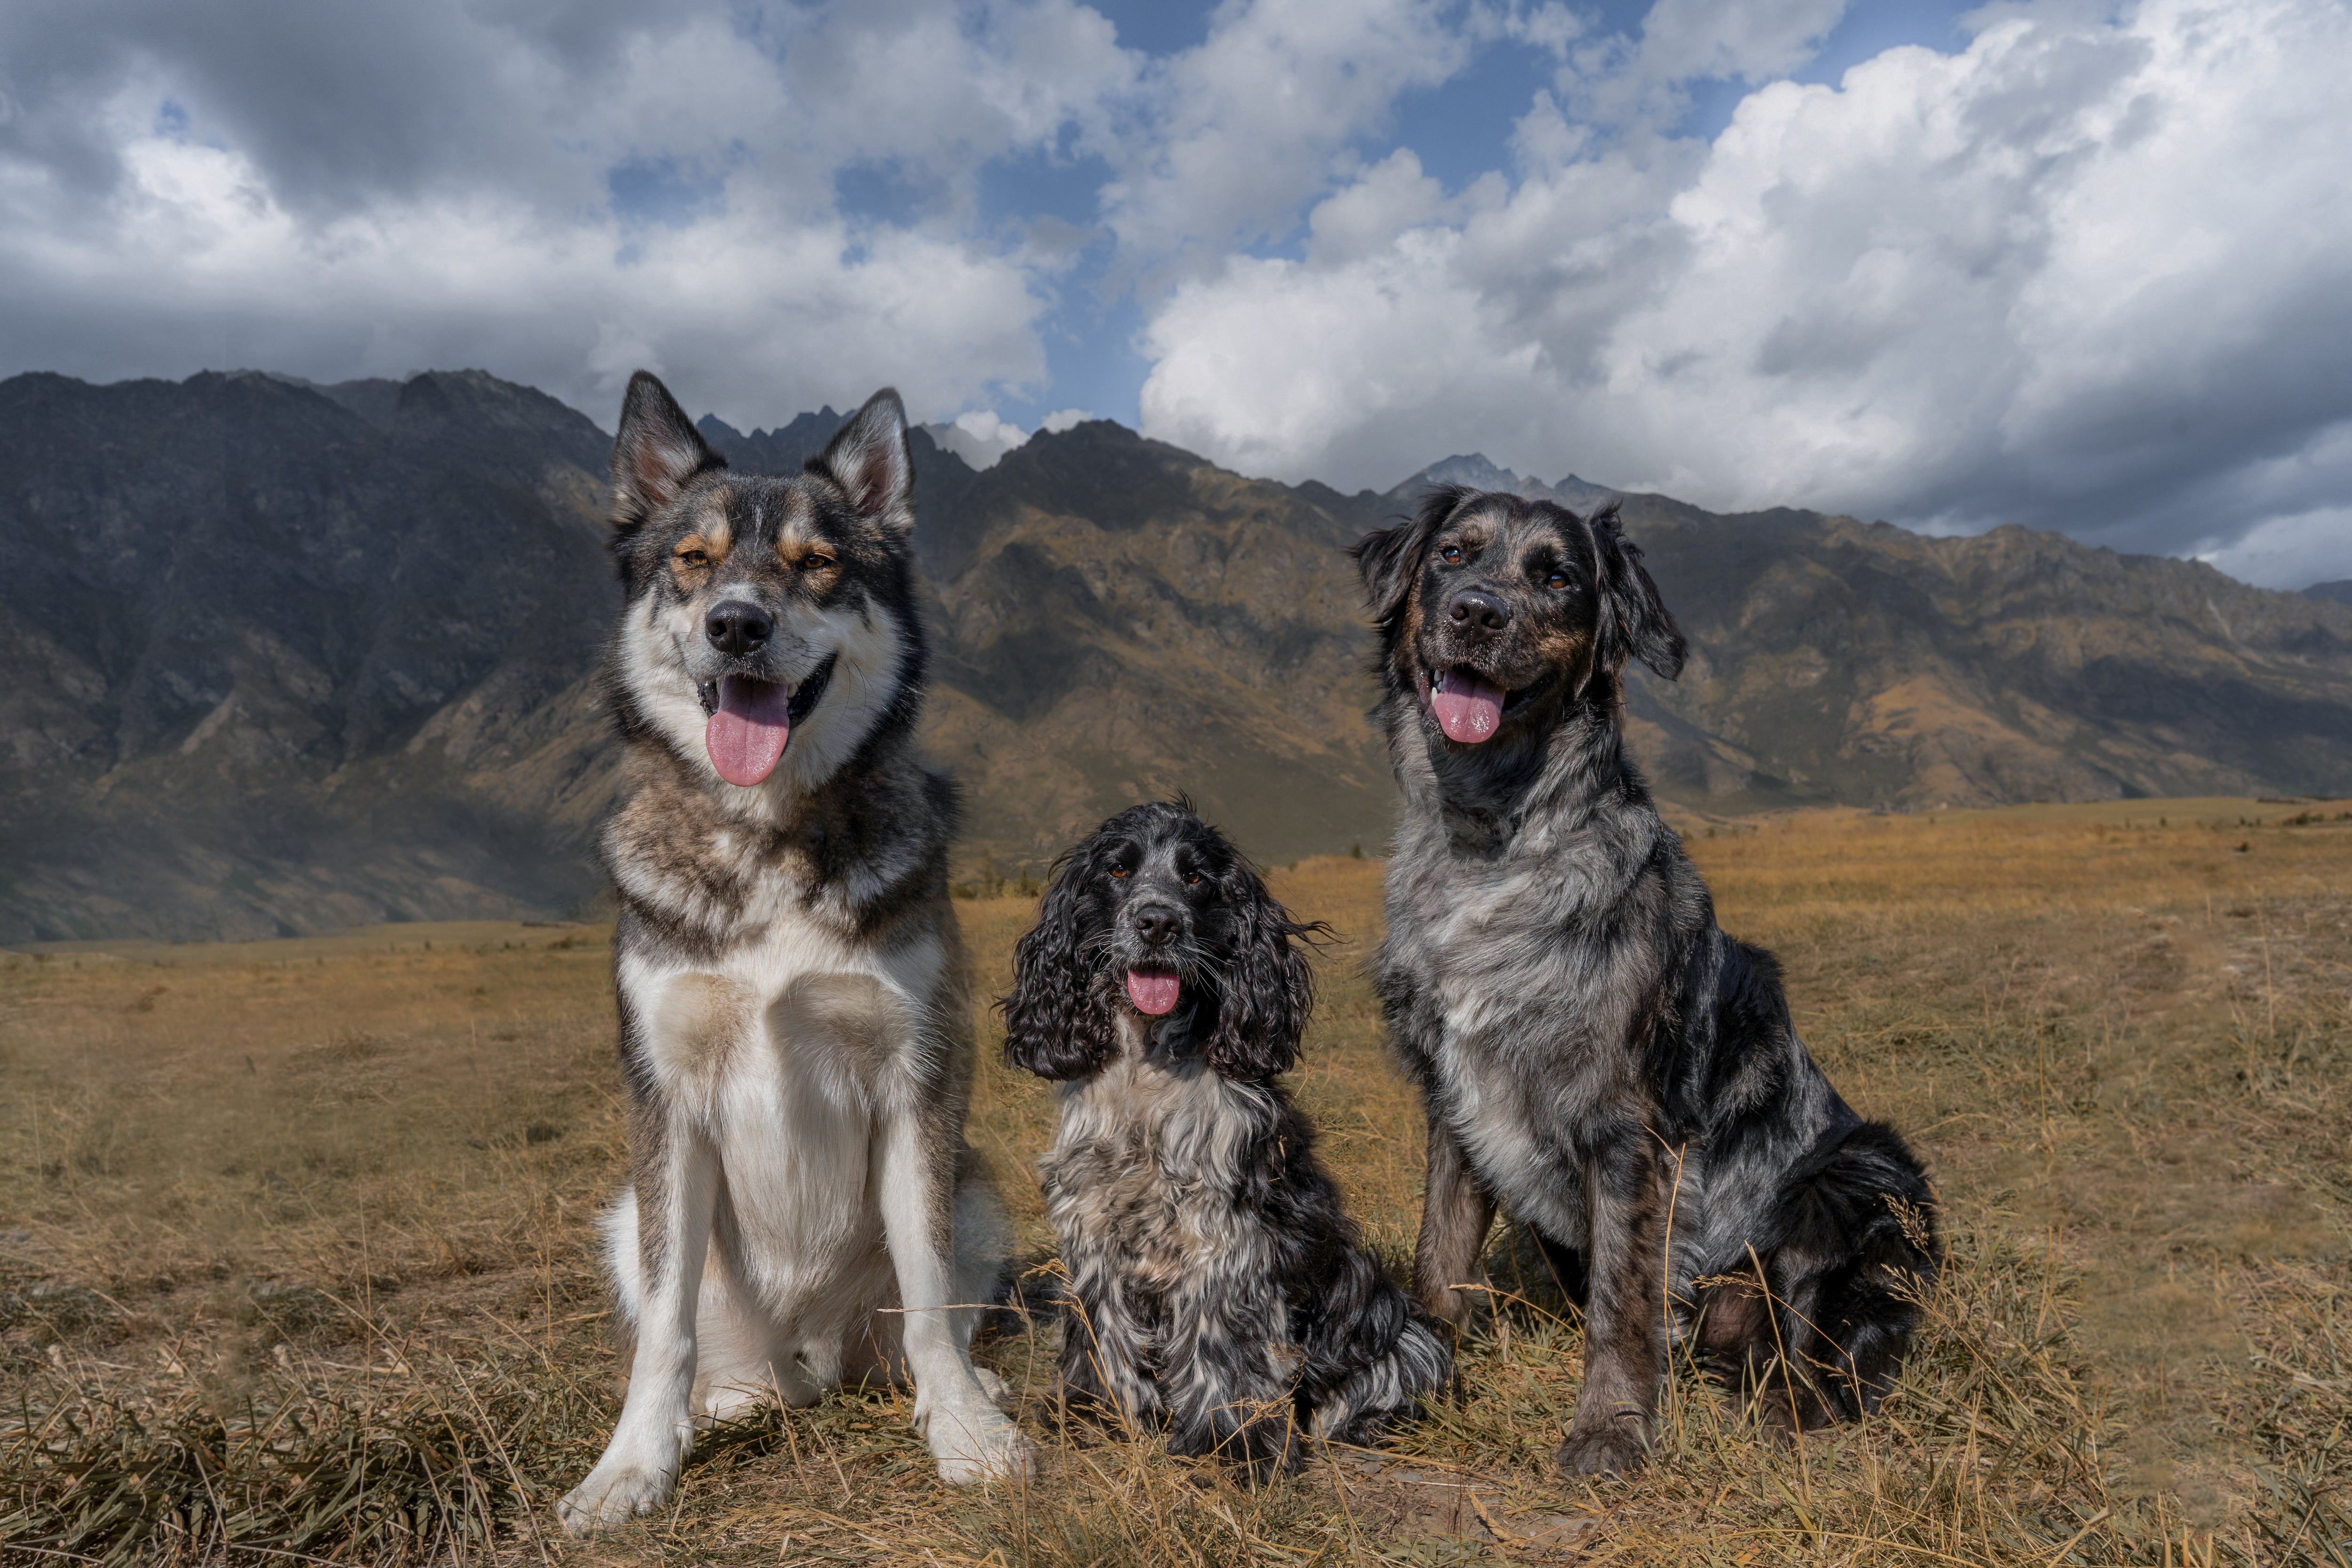 Three dogs outside by the mountains.